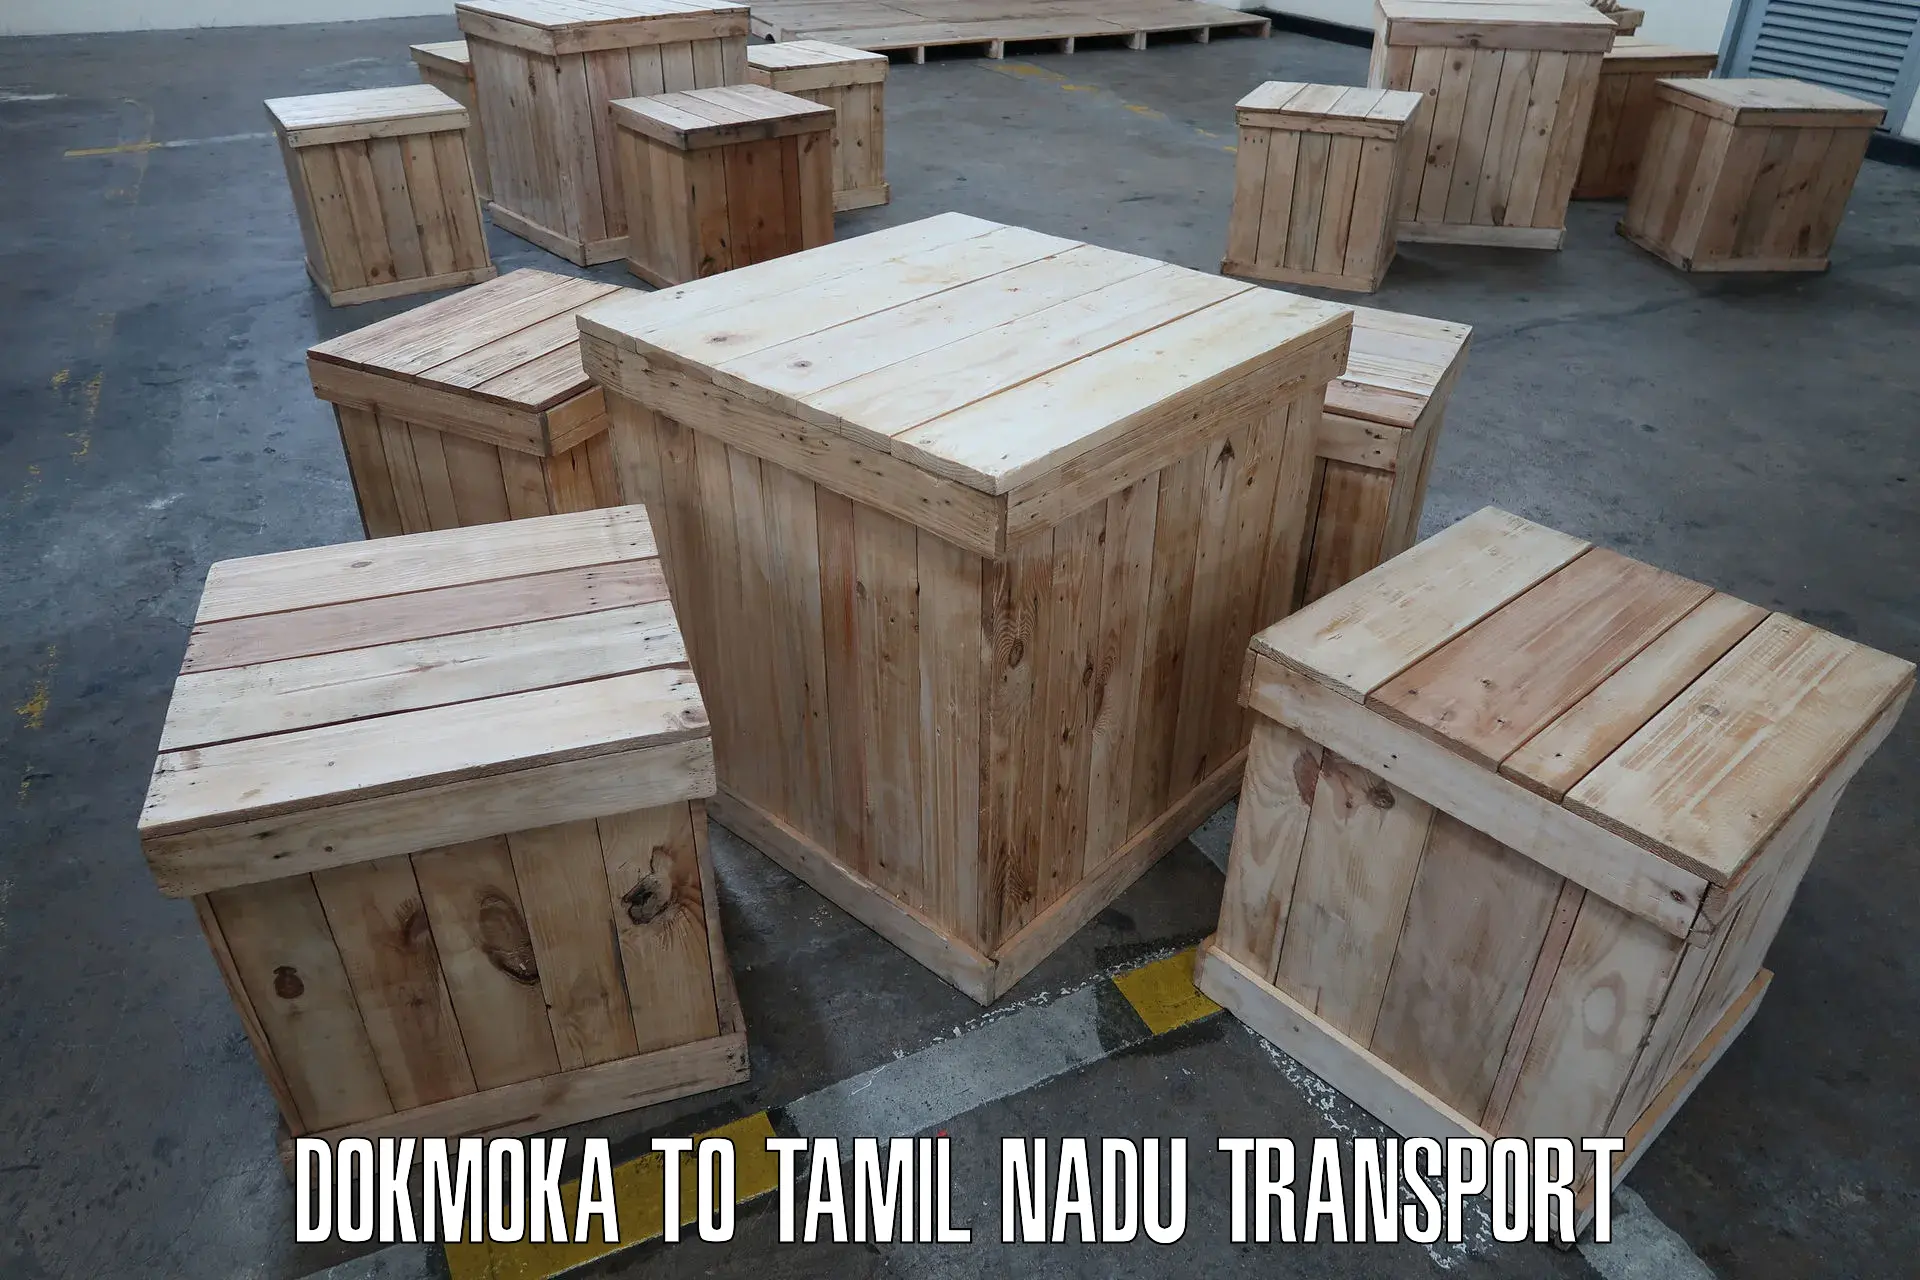 Road transport services Dokmoka to Vellore Institute of Technology